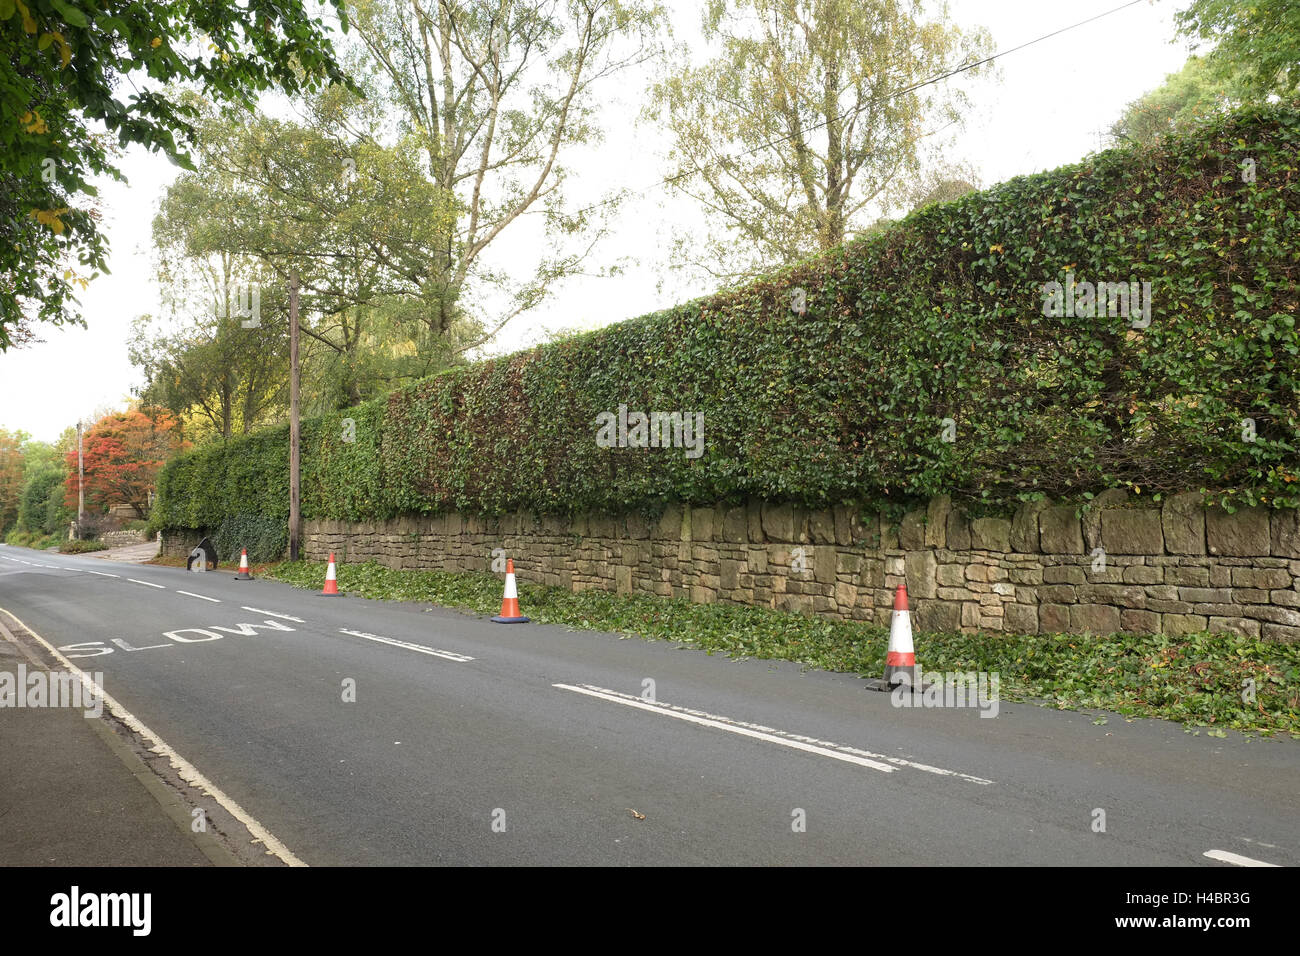 13th October 2016 - Road signs and traffic cones out during the trimming of a high hedge beside a busy road. Stock Photo